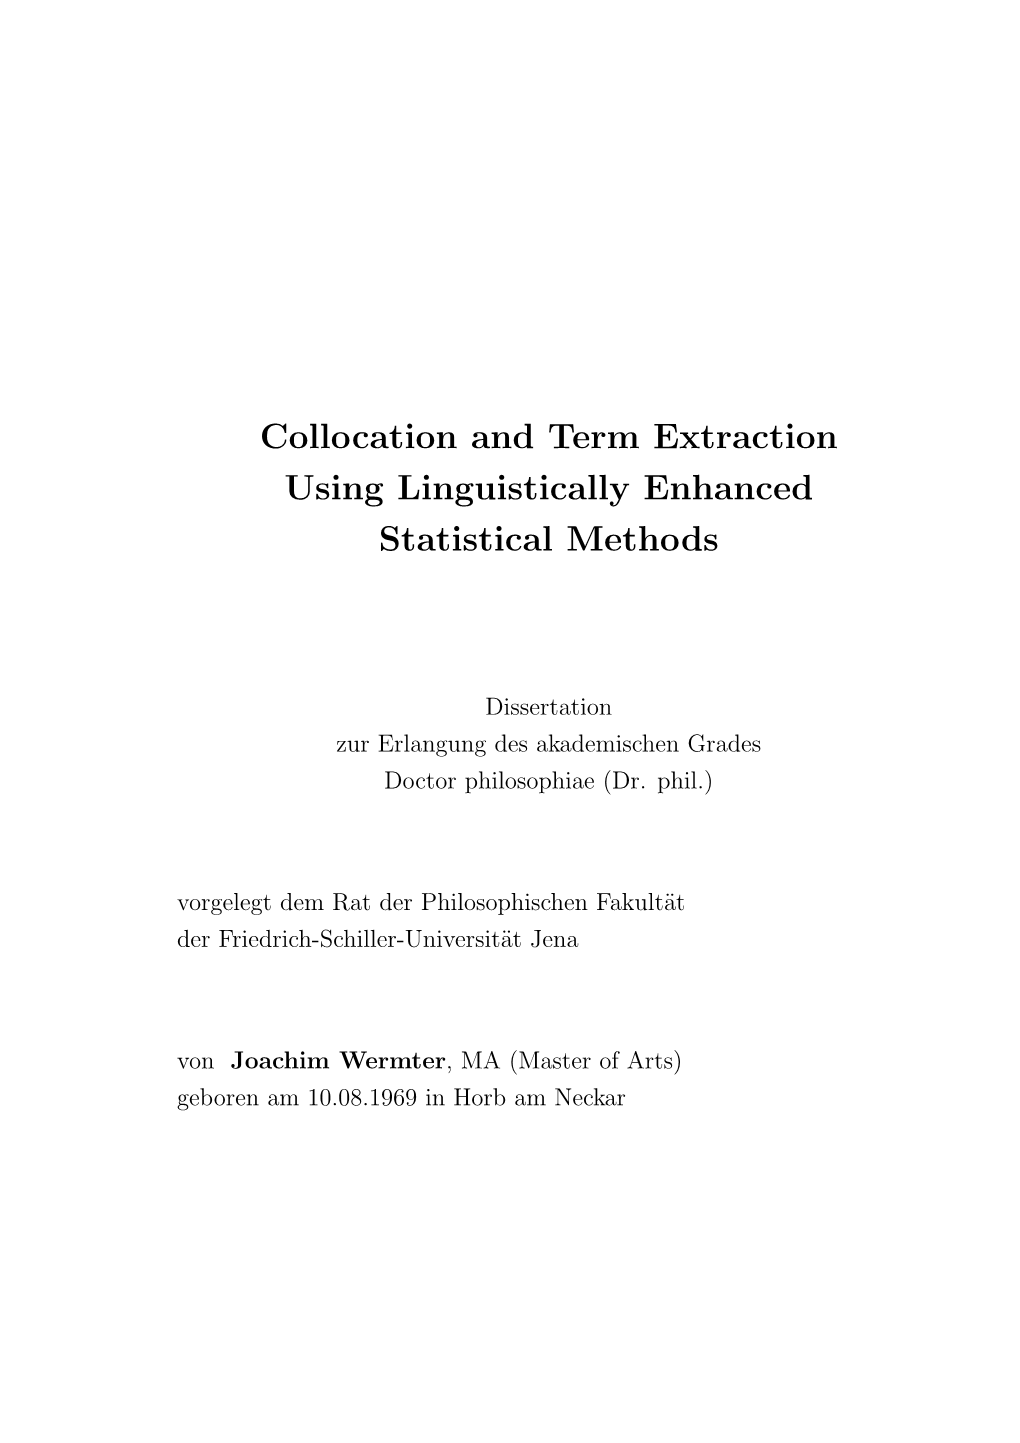 Collocation and Term Extraction Using Linguistically Enhanced Statistical Methods